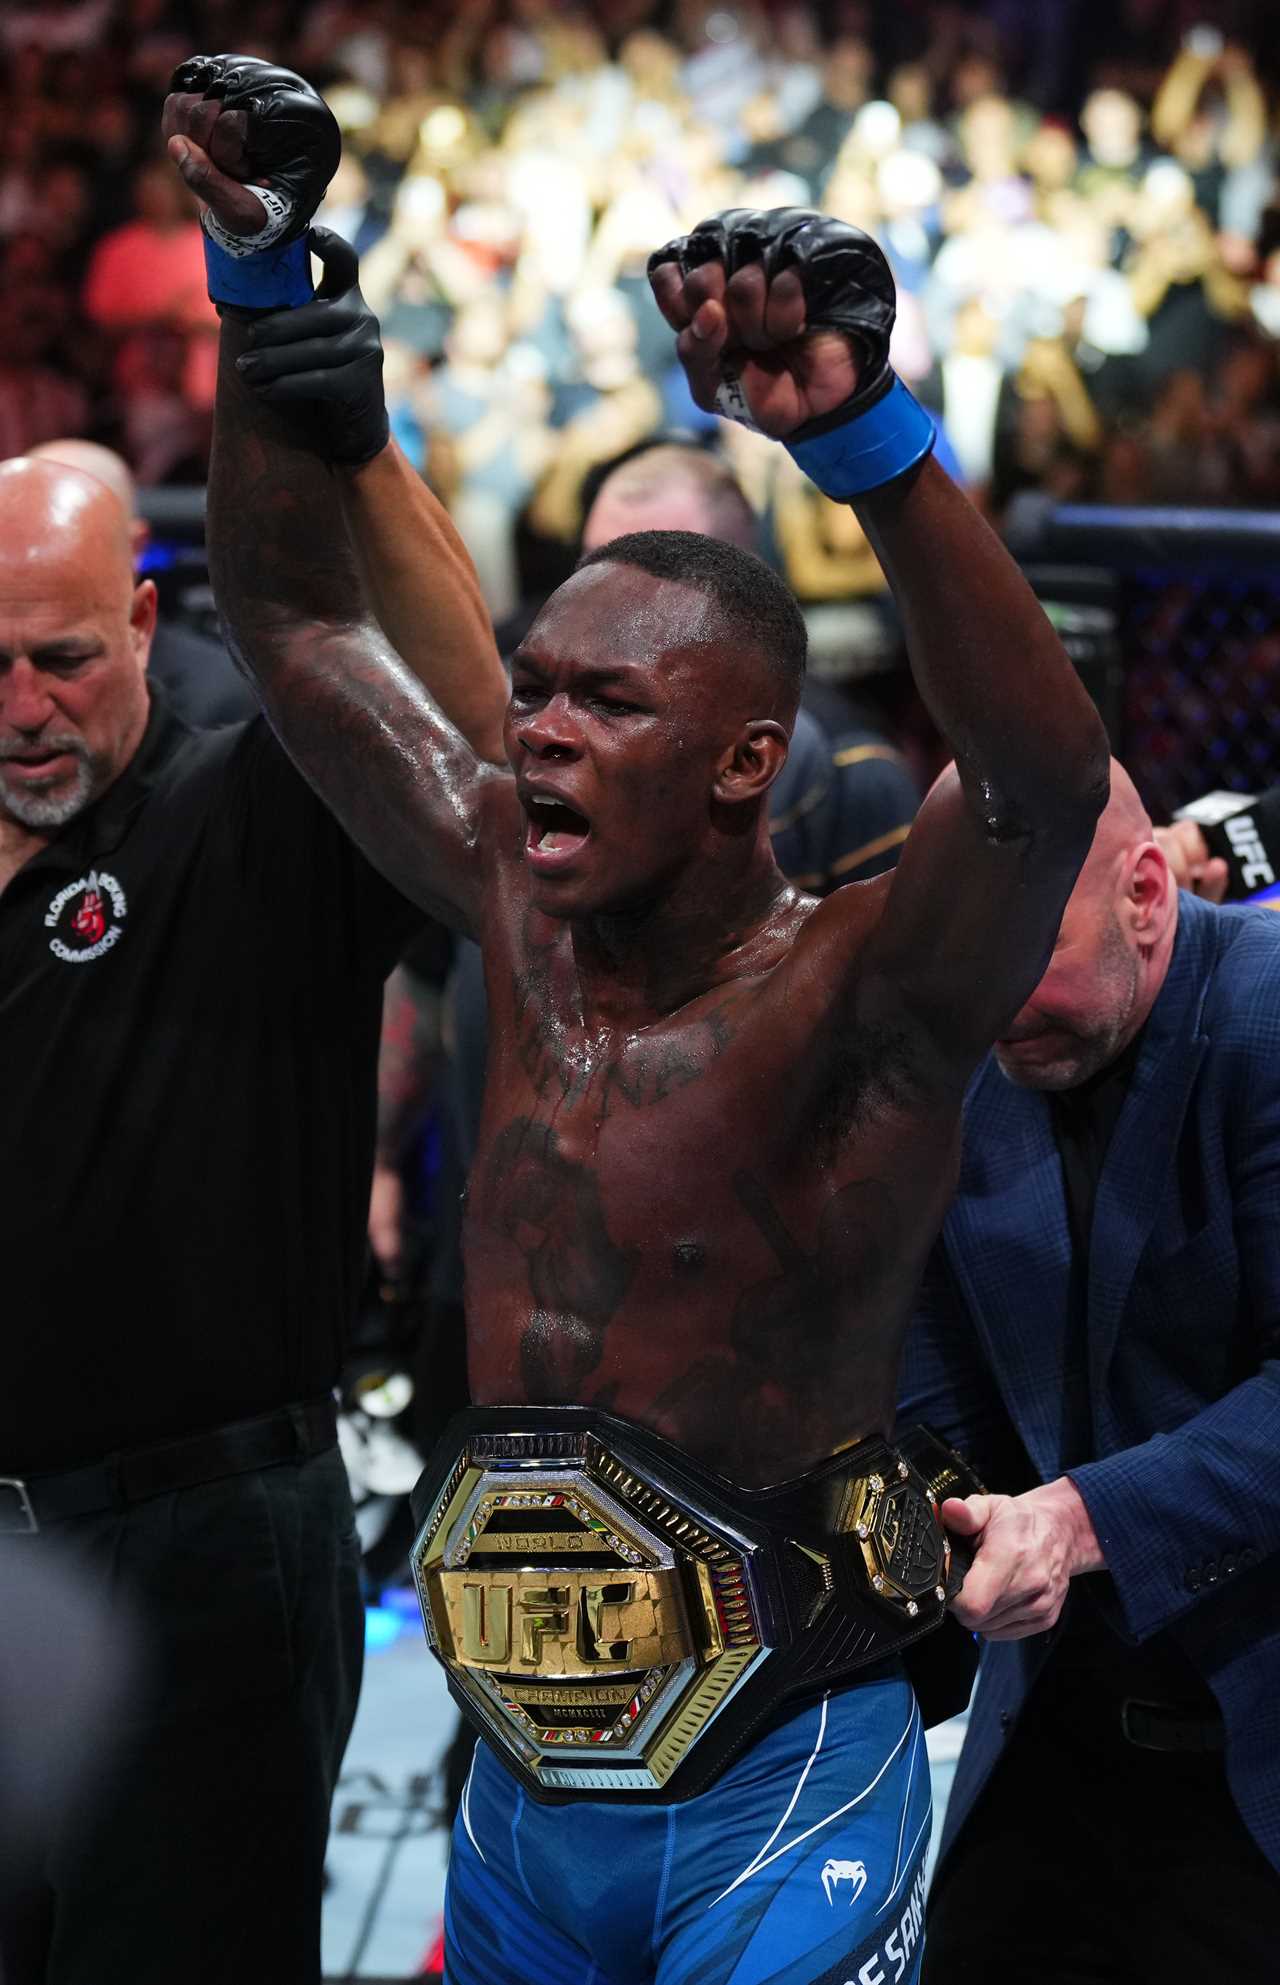 Israel Adesanya to defend his title against Sean Strickland in UFC 293